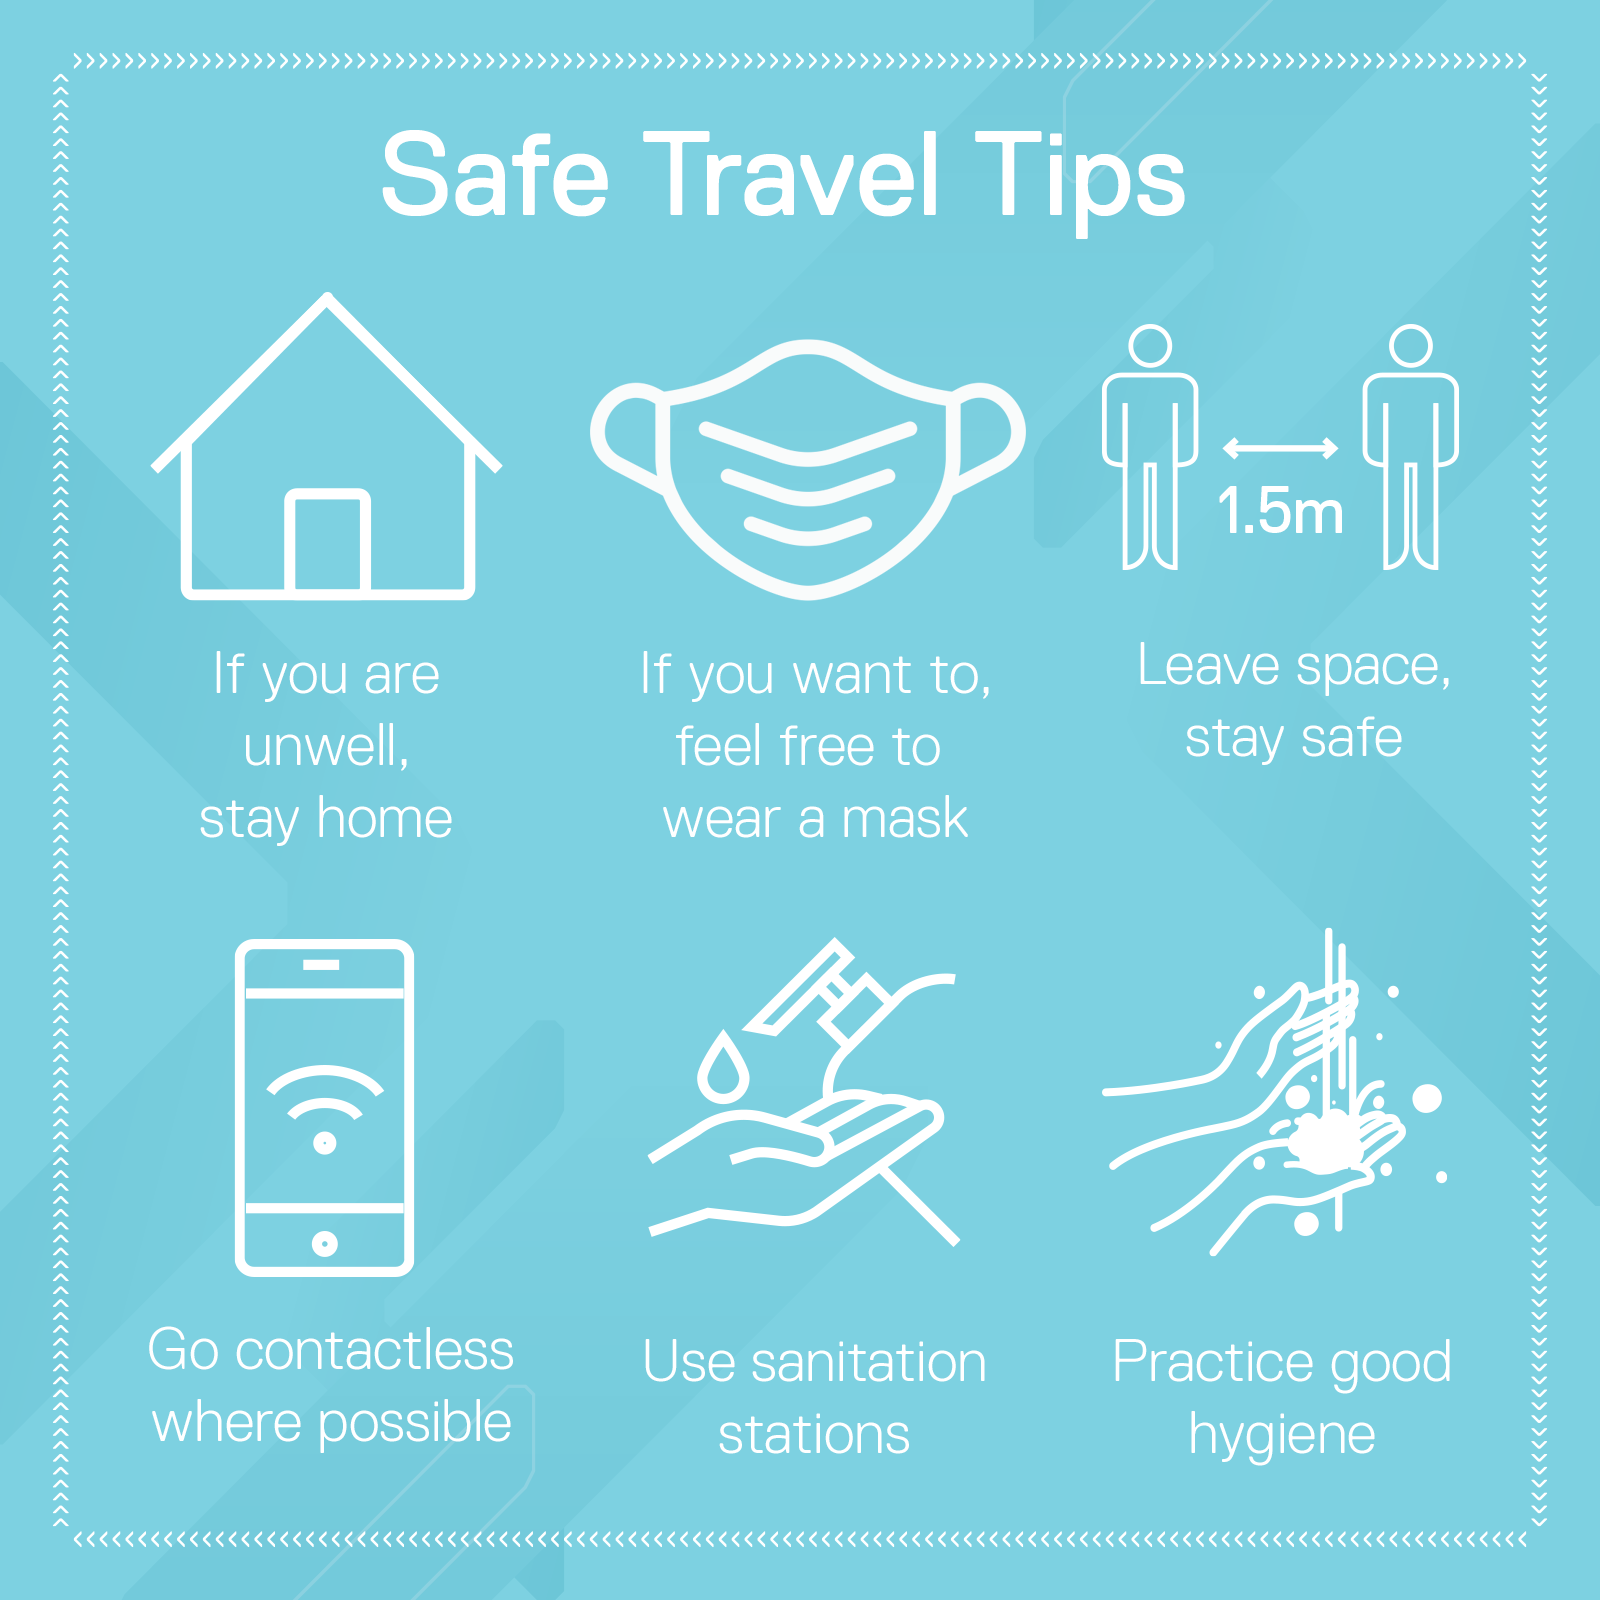 Safe Travel tips: stay home of unwell, wear a mask, leave 1.5m, go contactless, wash hands